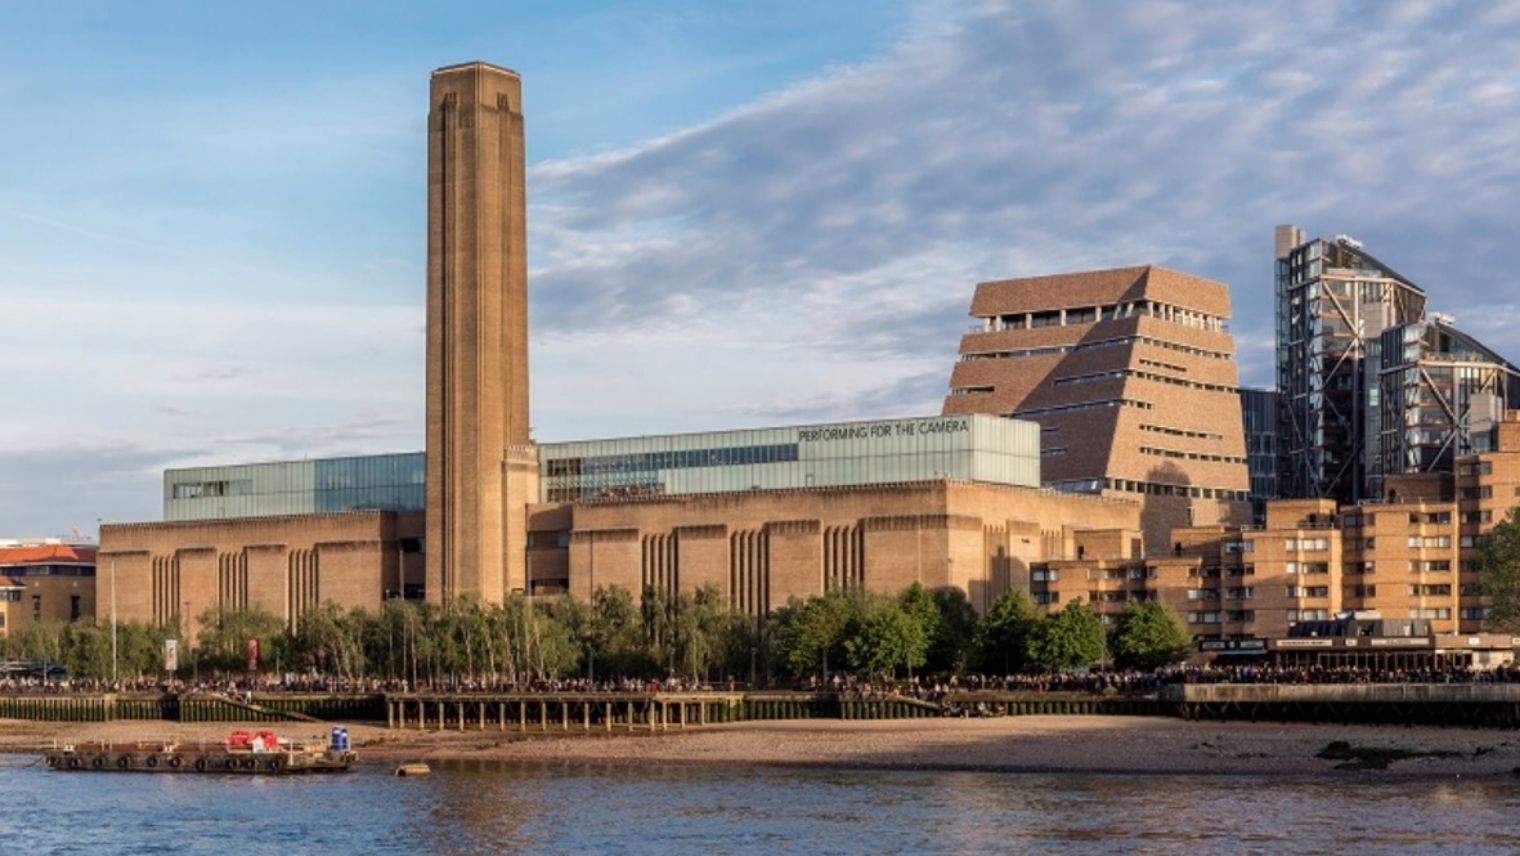 View of the Tate Modern from the north bank of the Thames